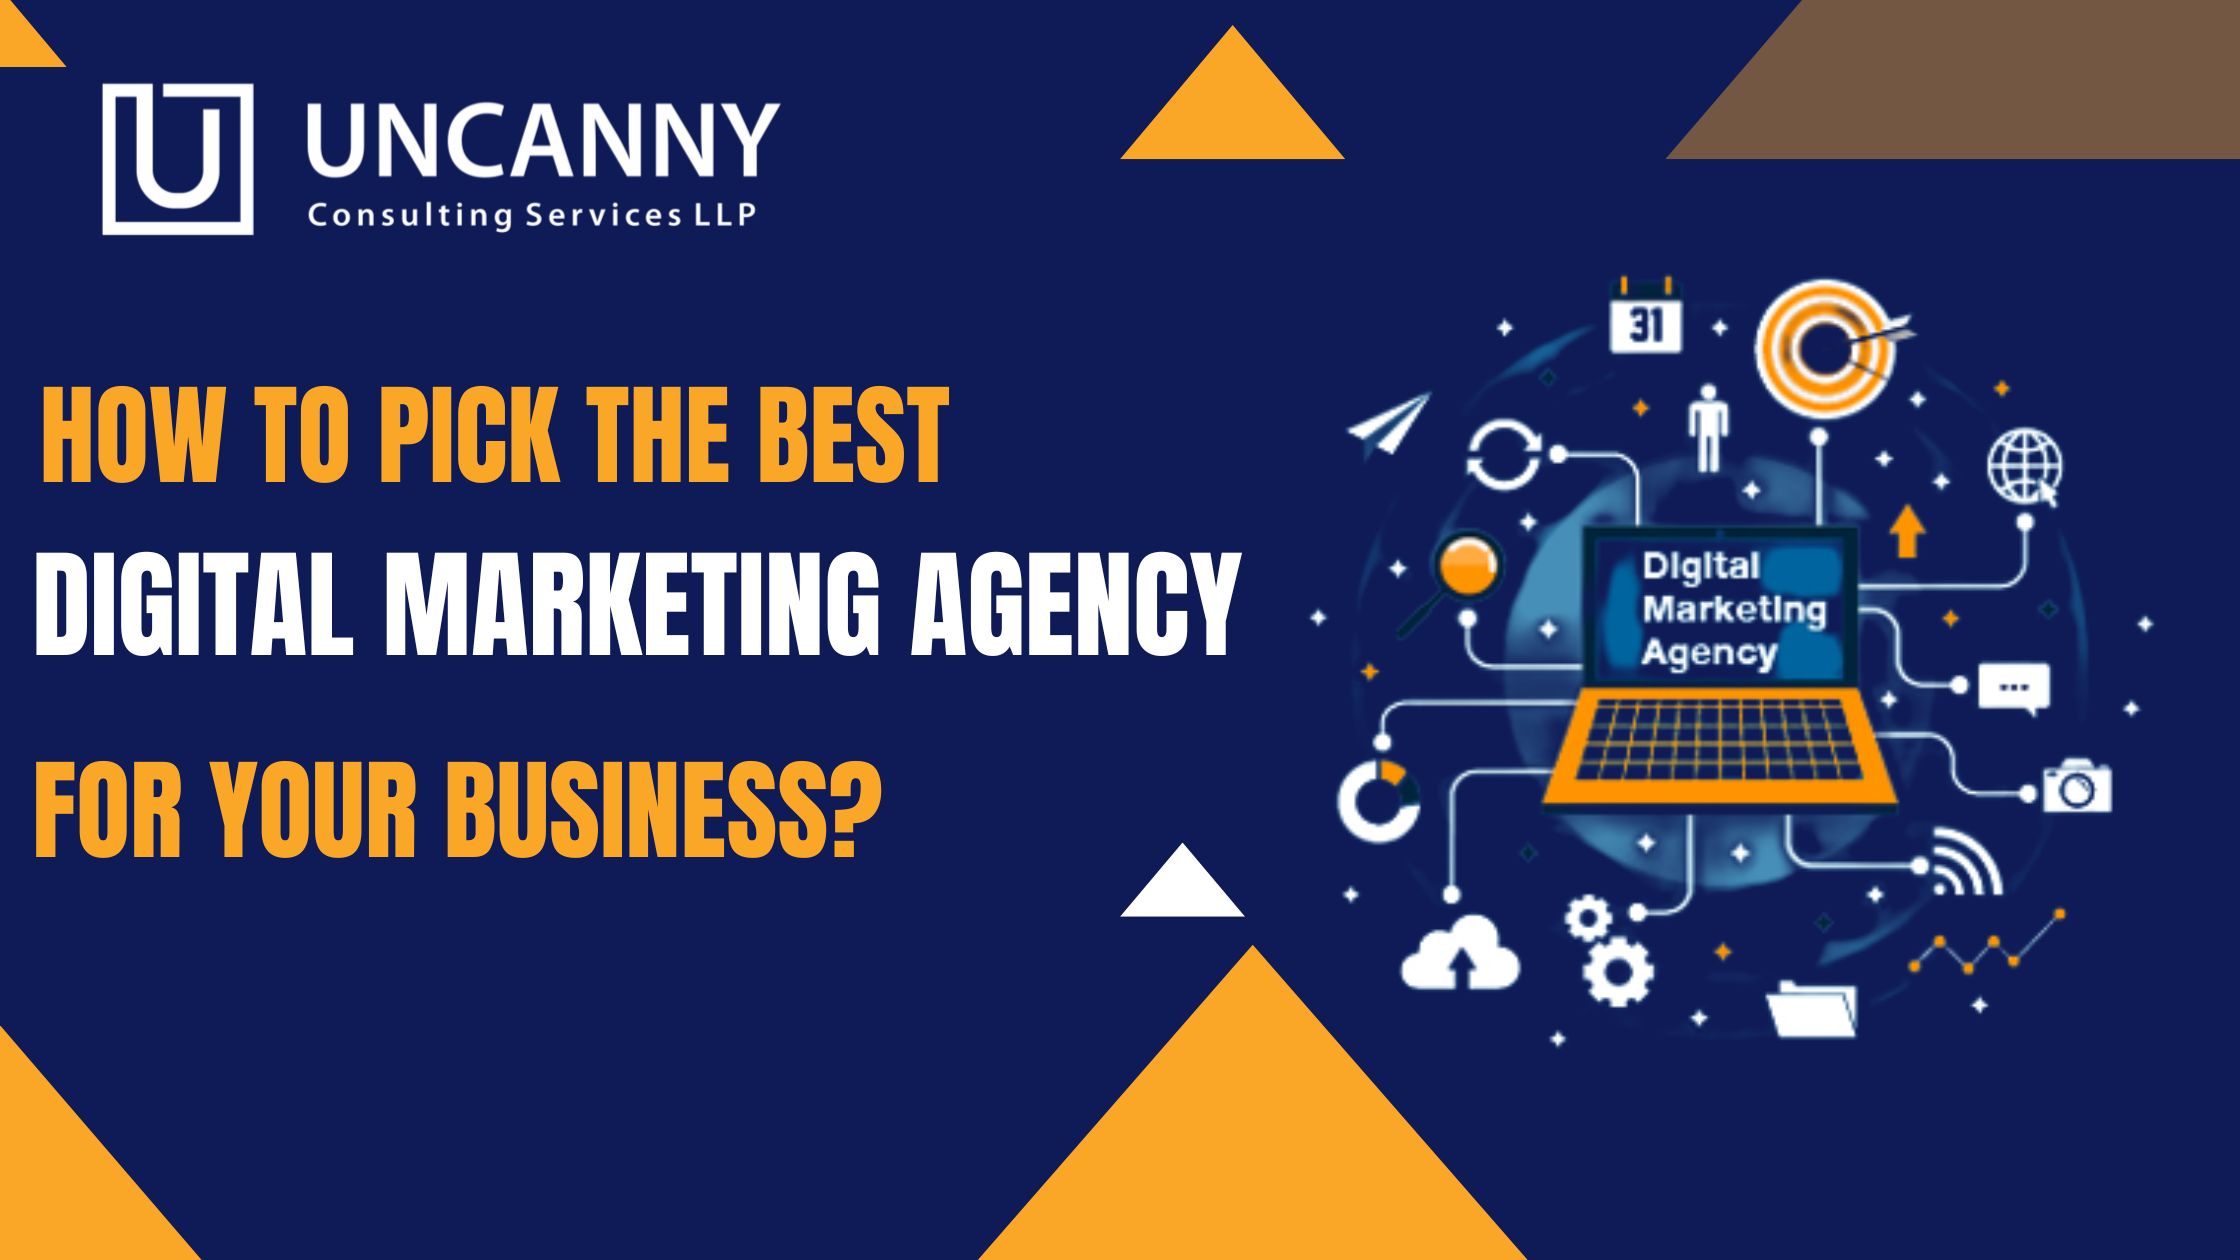 How to pick the best Digital Marketing Agency for your business?